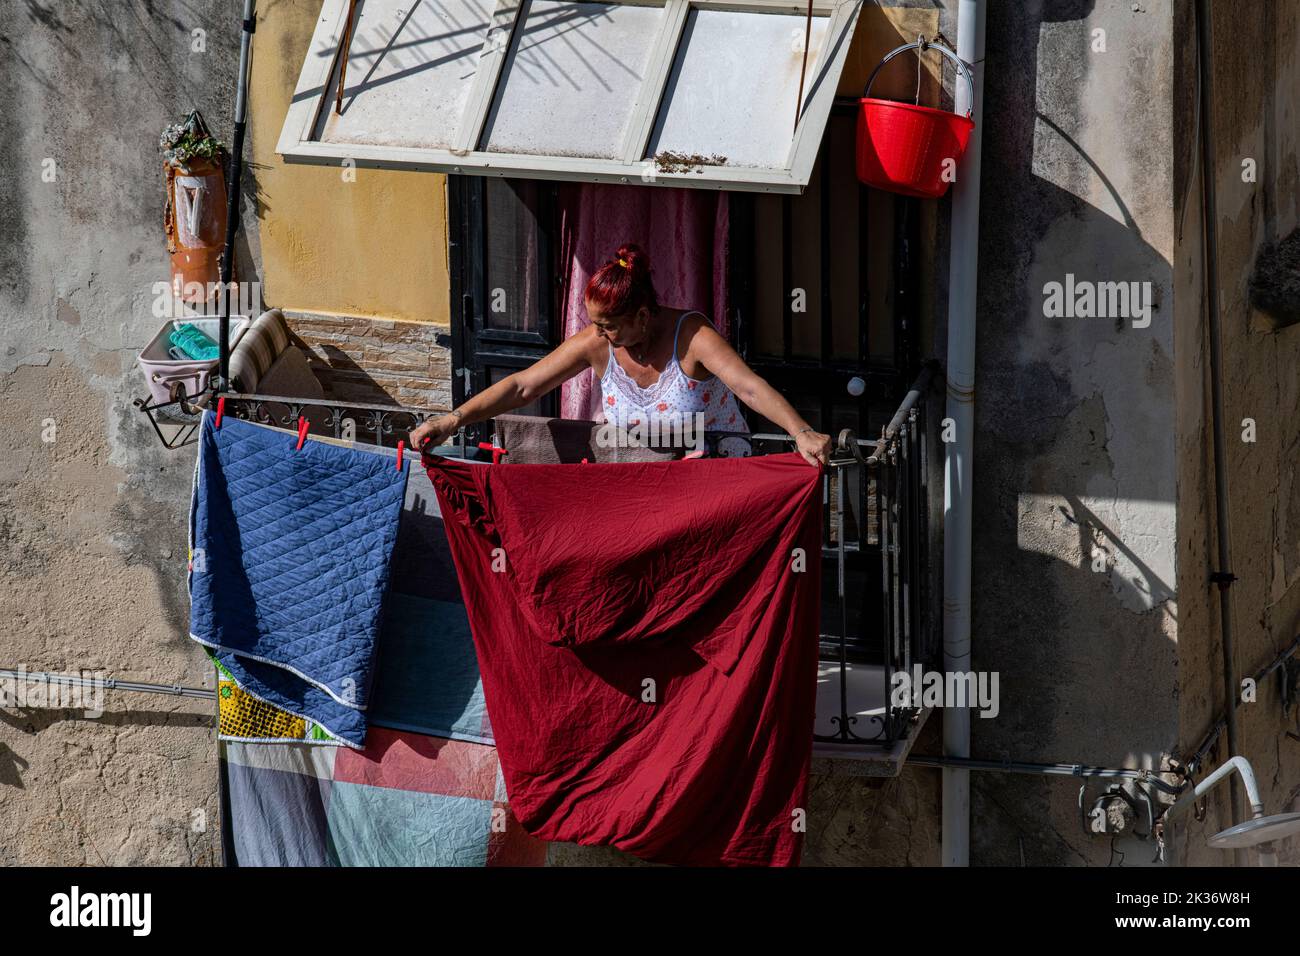 An Italian lady with red hair hangs out her washing to dry in the city of Ragusa in Sicily, Italy Stock Photo